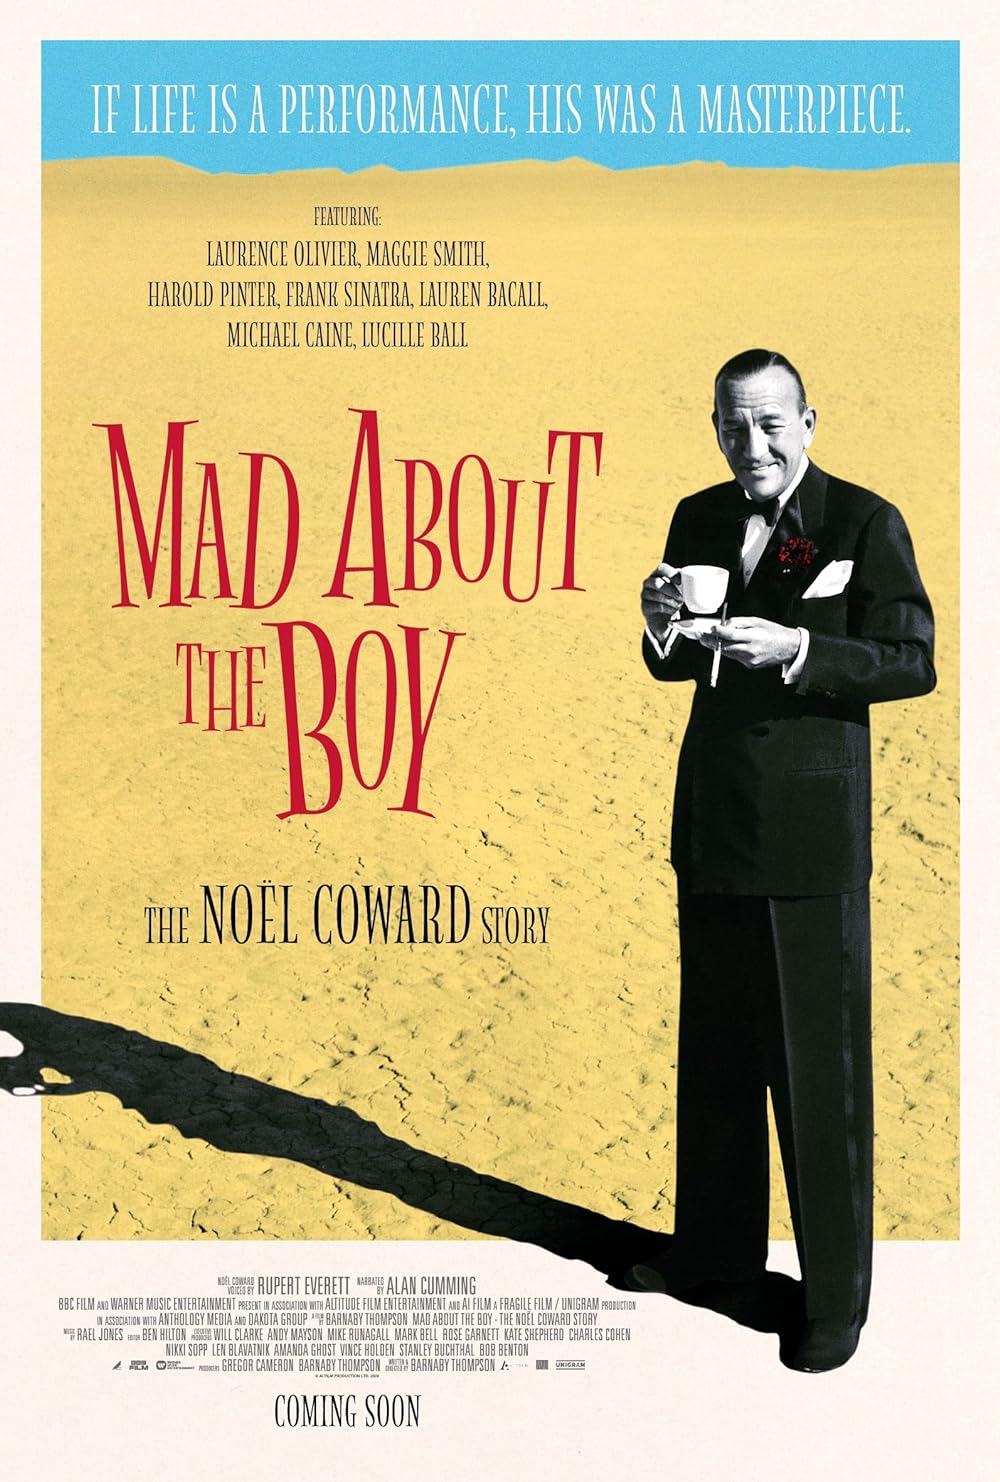 Mad About the Boy - The Noel Coward Story